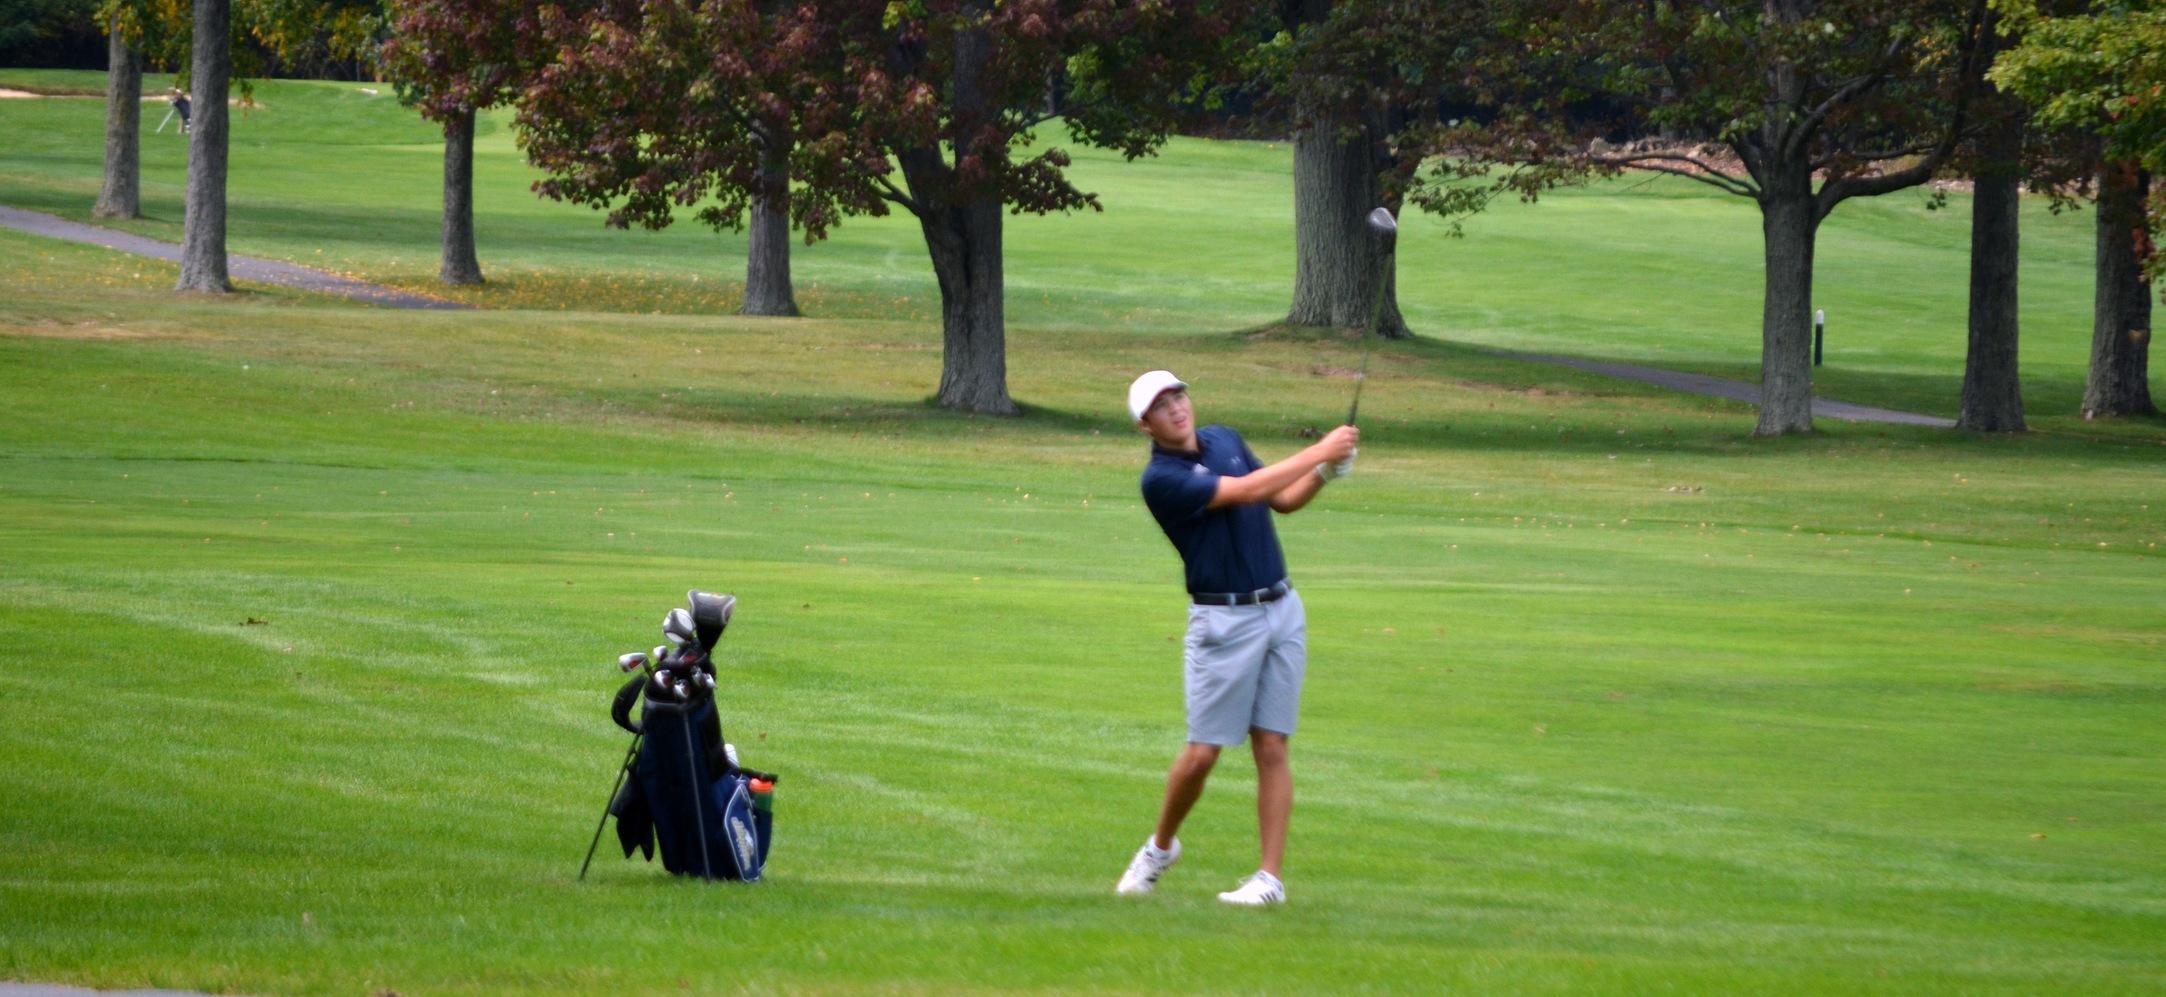 Men's Golf Finishes Ninth at Moravian College Spring Invitational